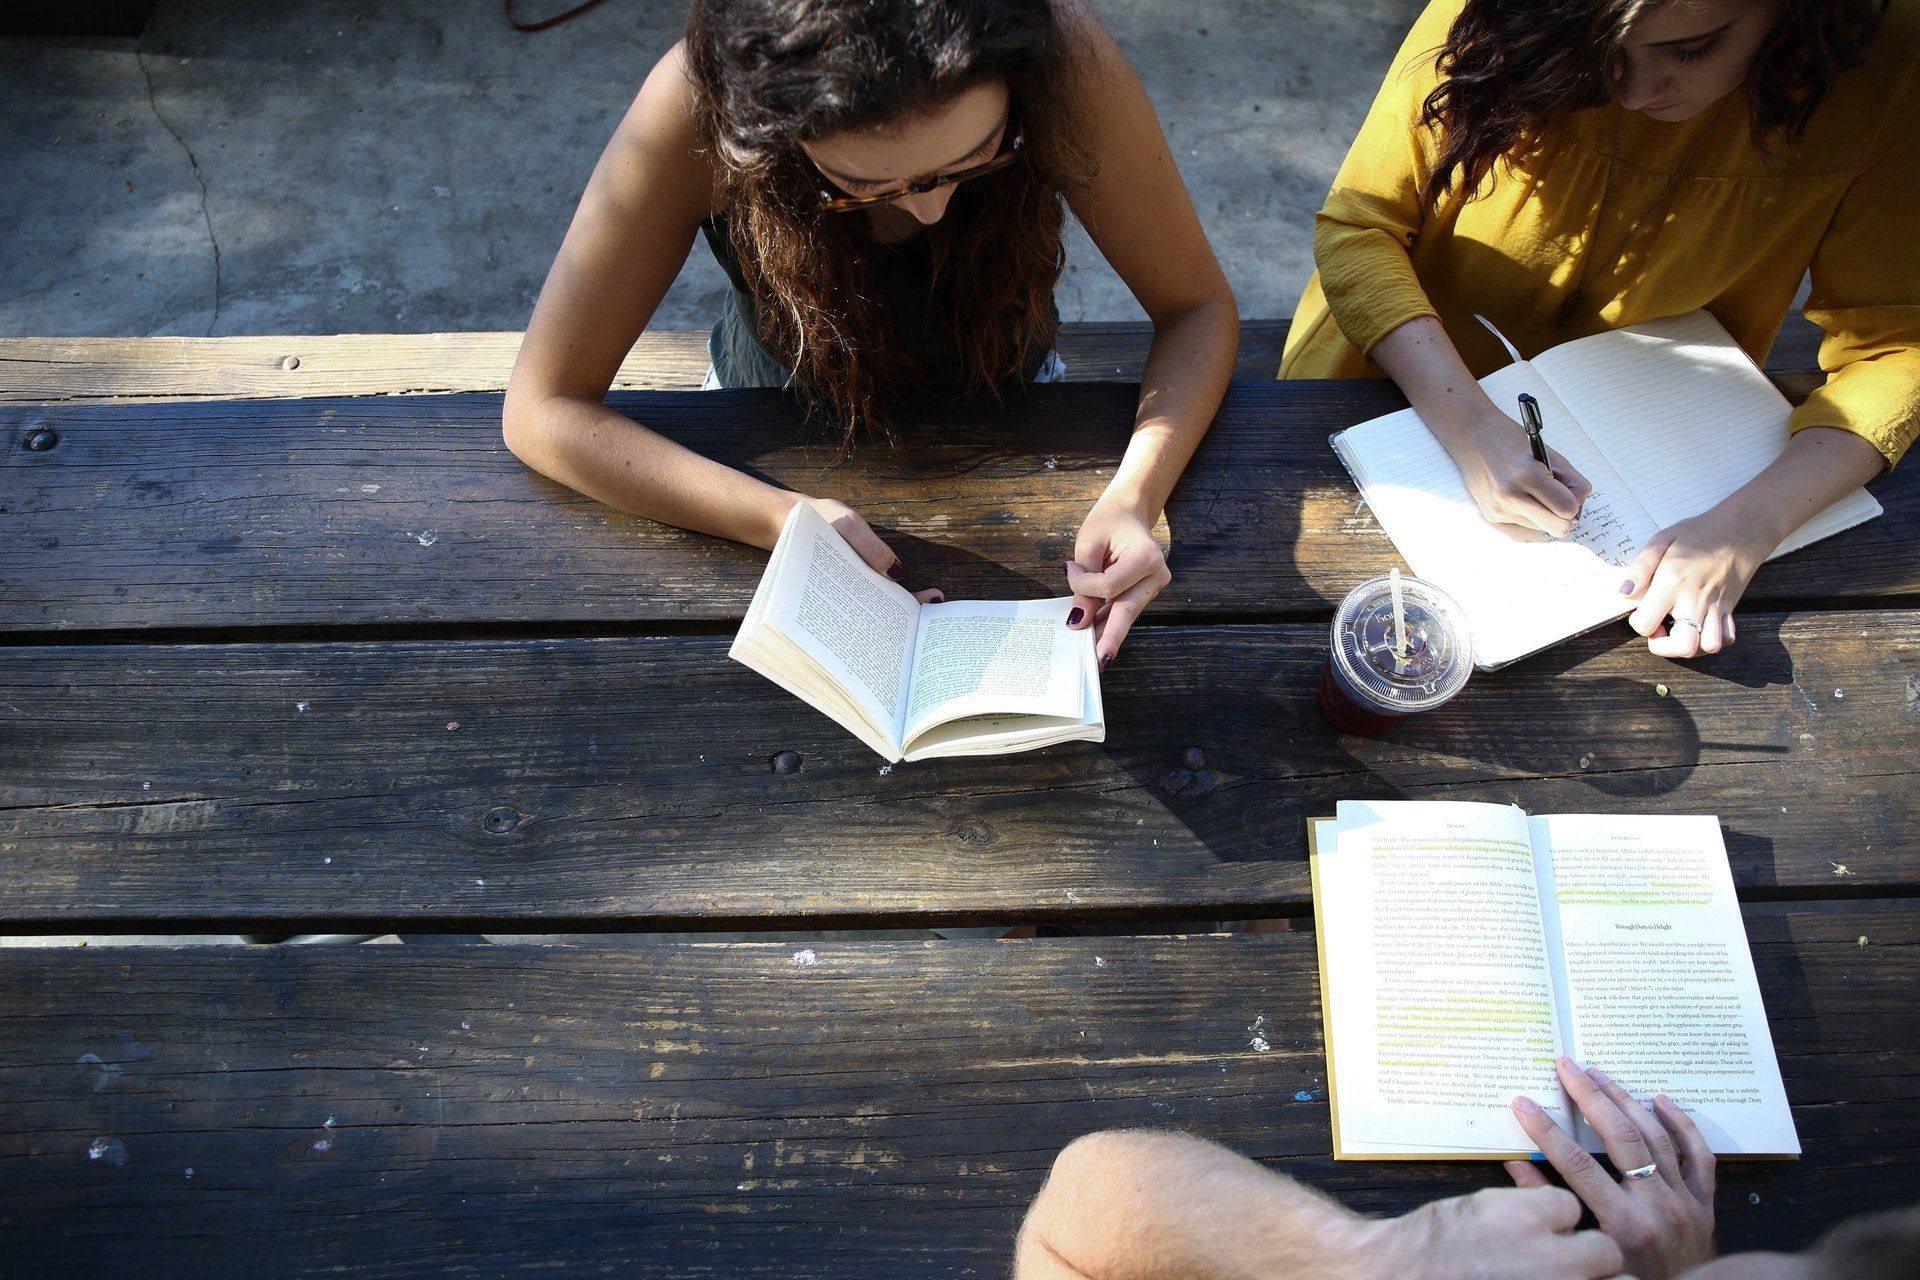 Three women are sitting at a picnic table reading books and writing in notebooks.